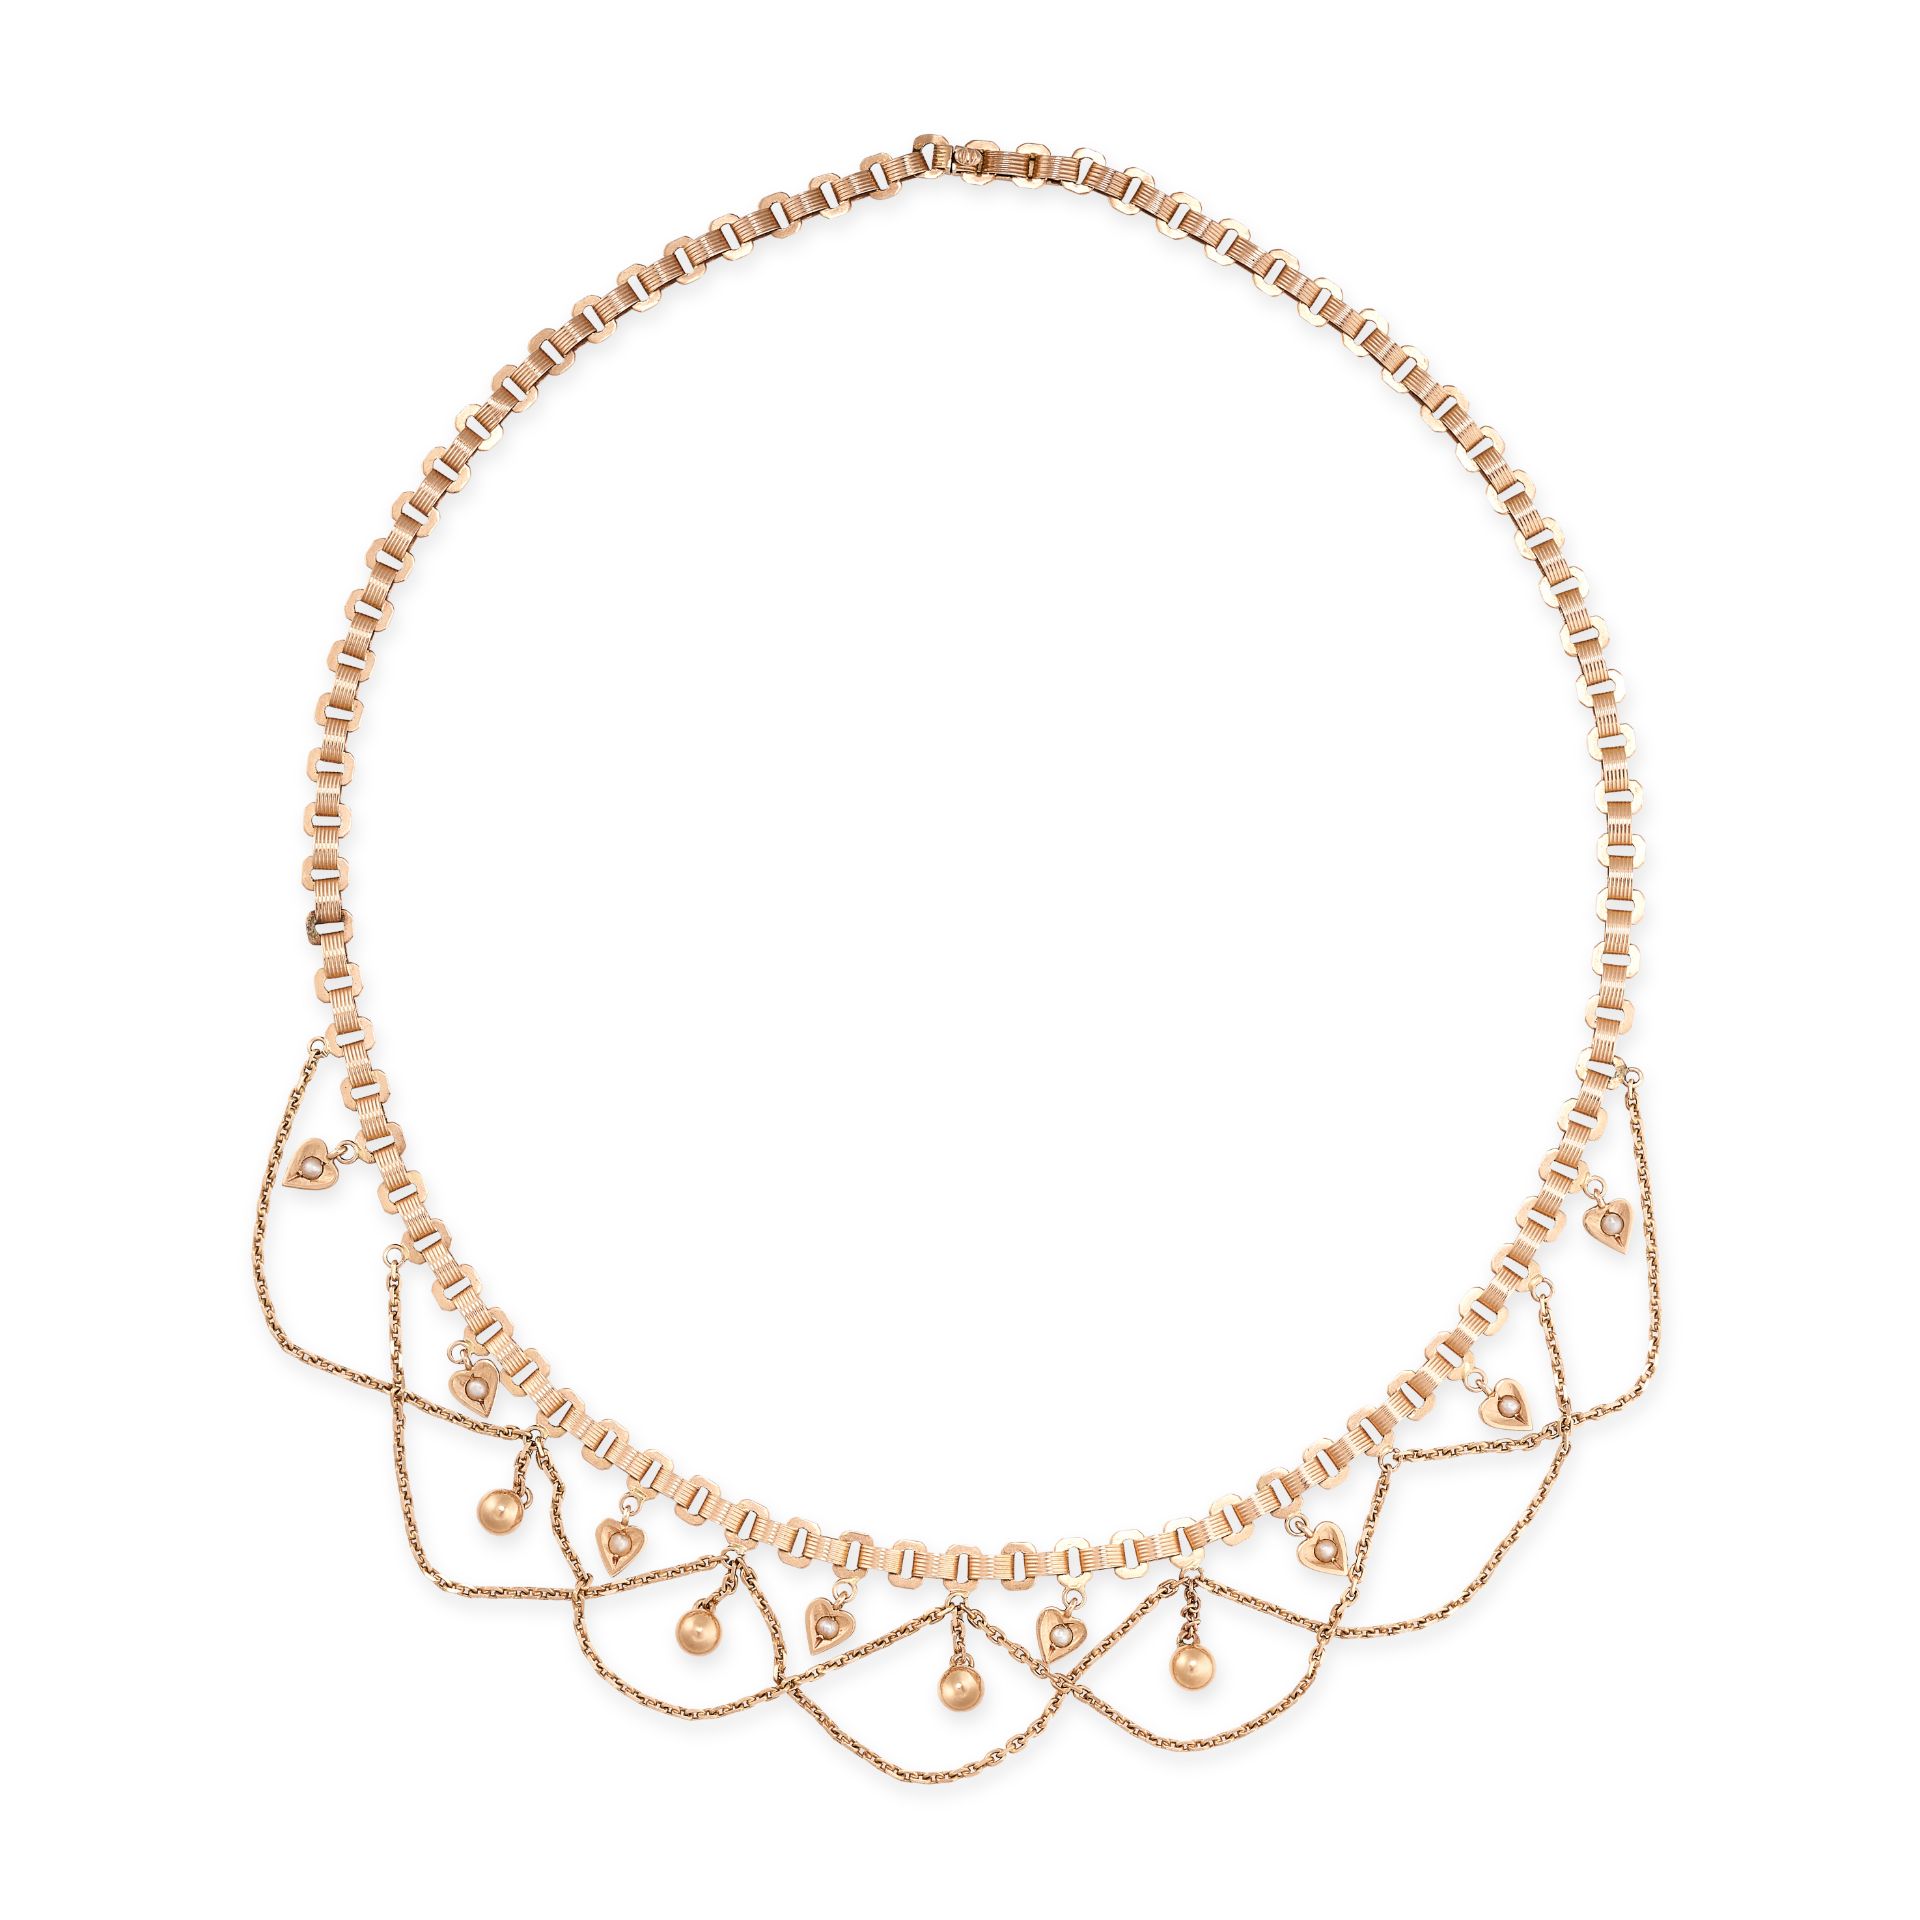 AN ANTIQUE PEARL FRINGE NECKLACE in yellow gold, the fancy link necklace suspending a series of